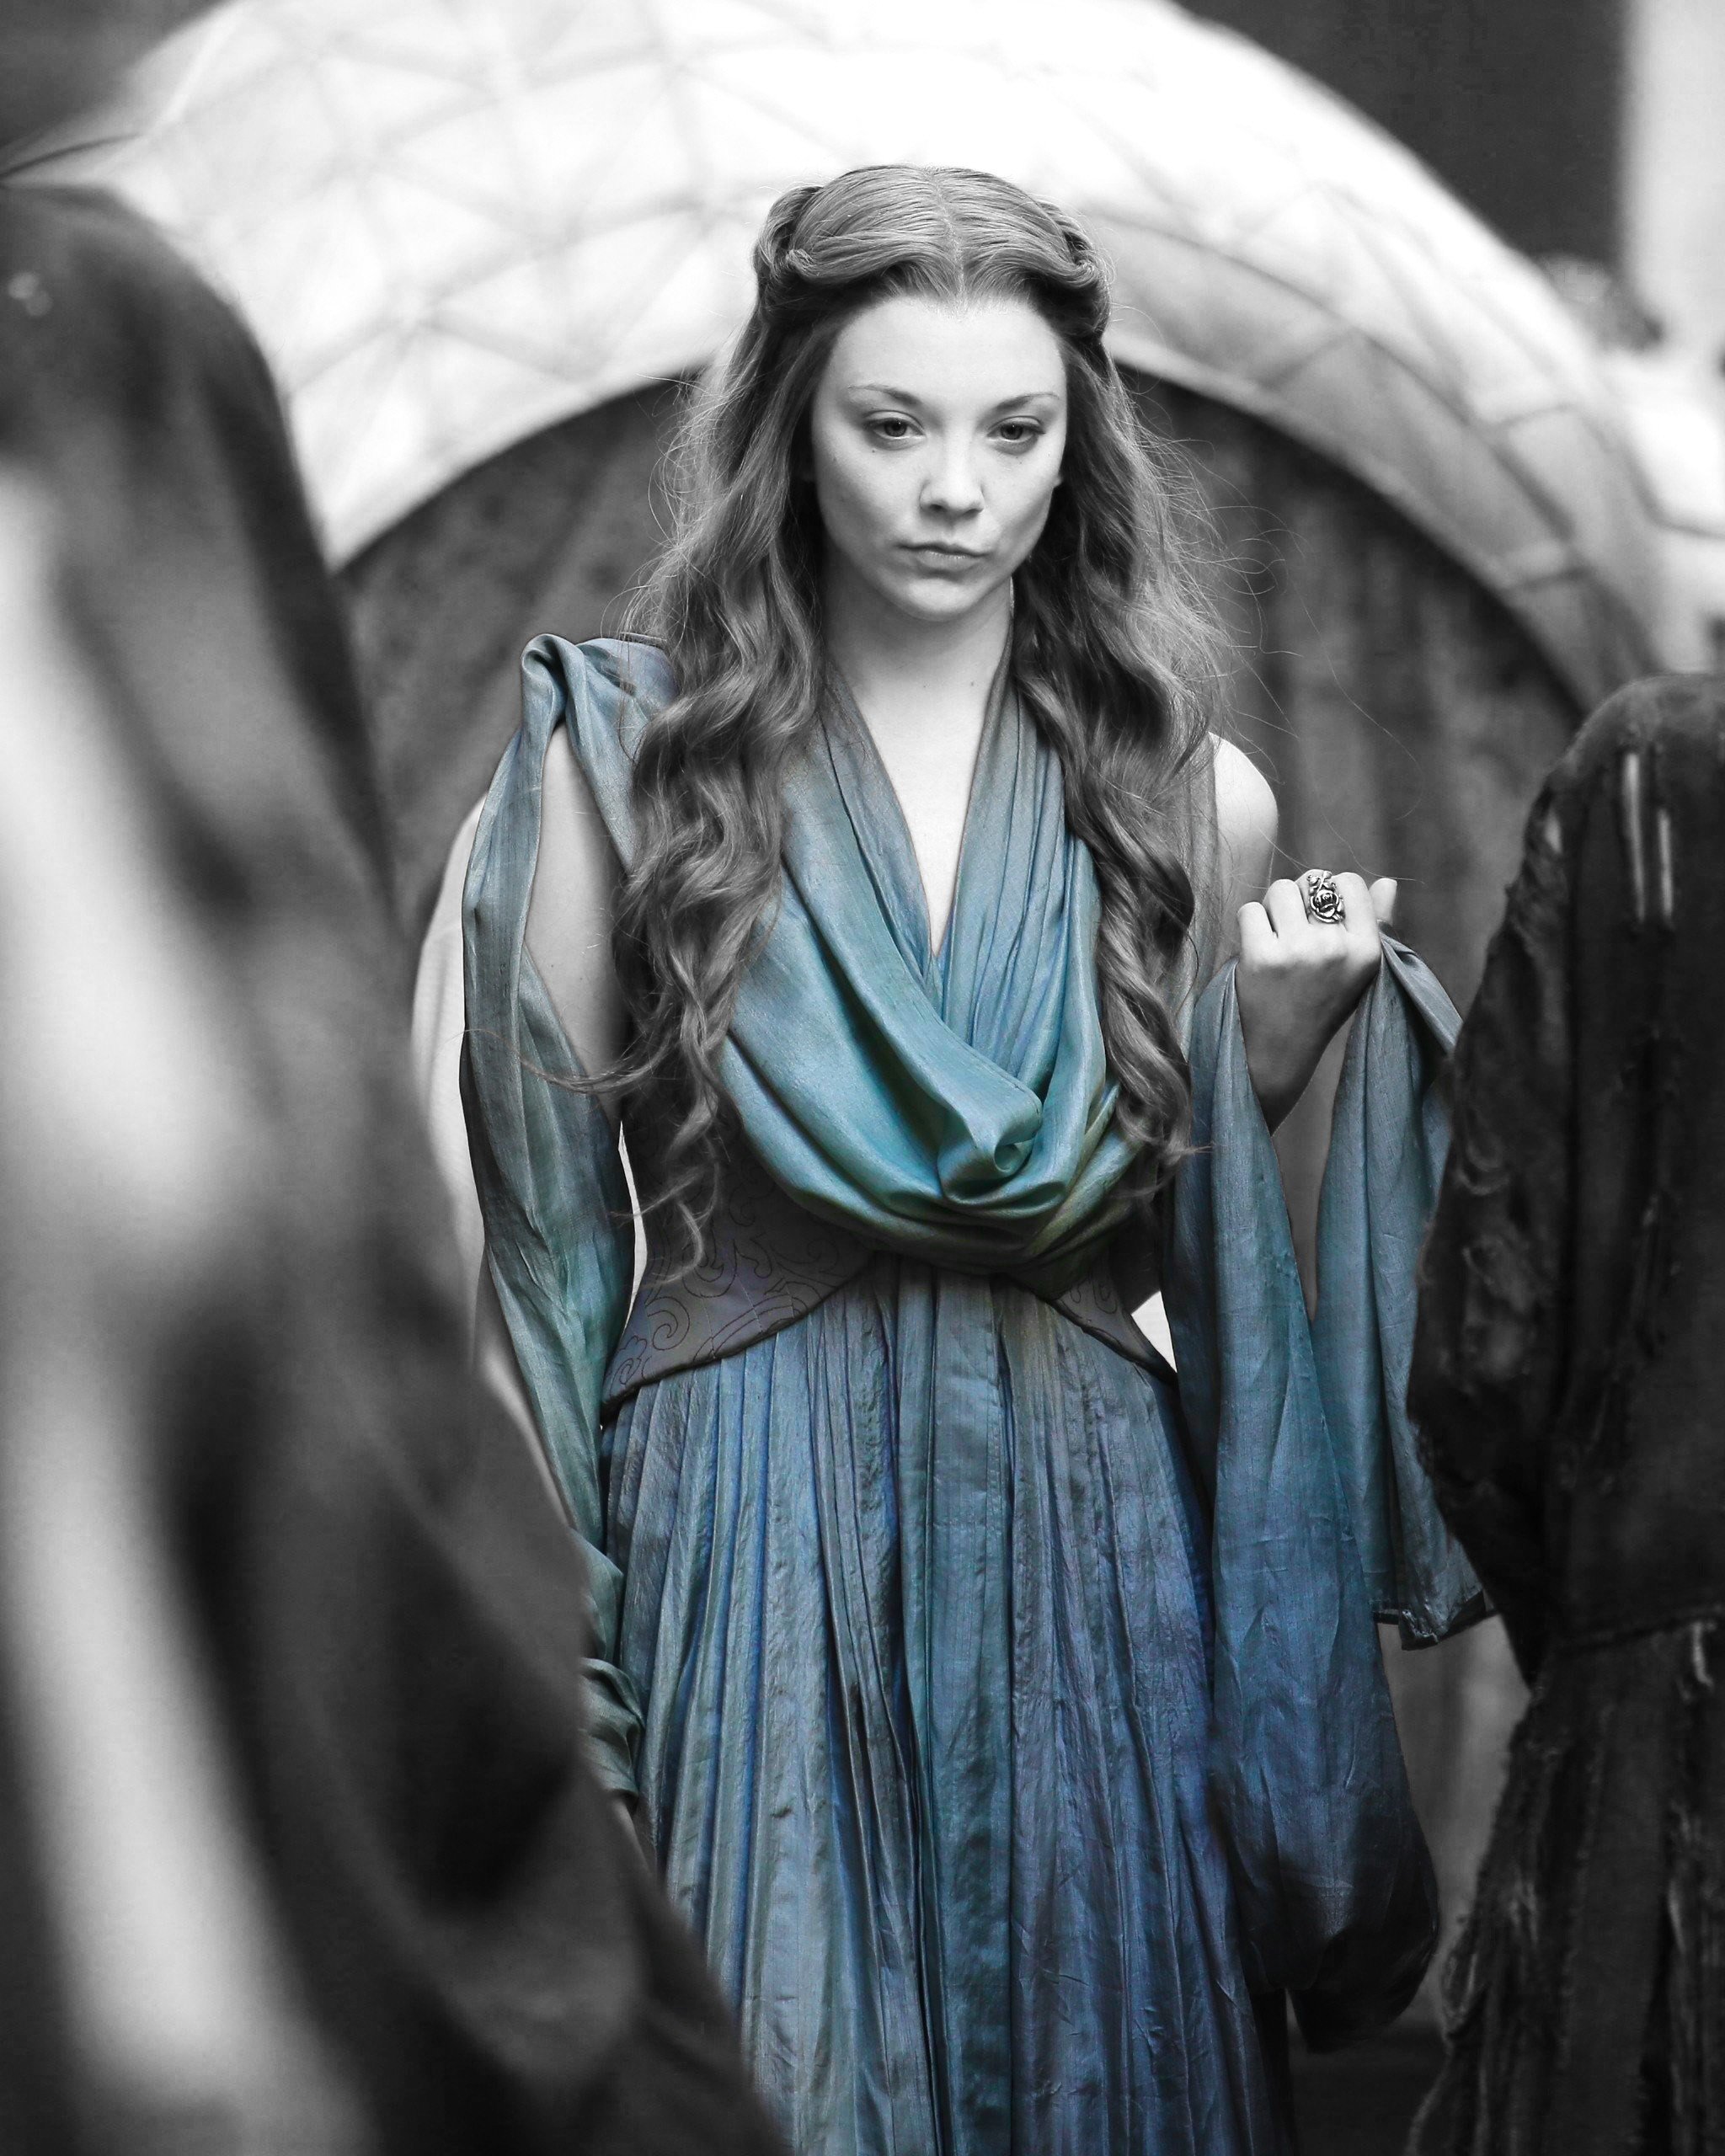 selective coloring, Adobe Photoshop, Game of Thrones, Natalie Dormer, Actress, Women, Margaery Tyrell Wallpaper